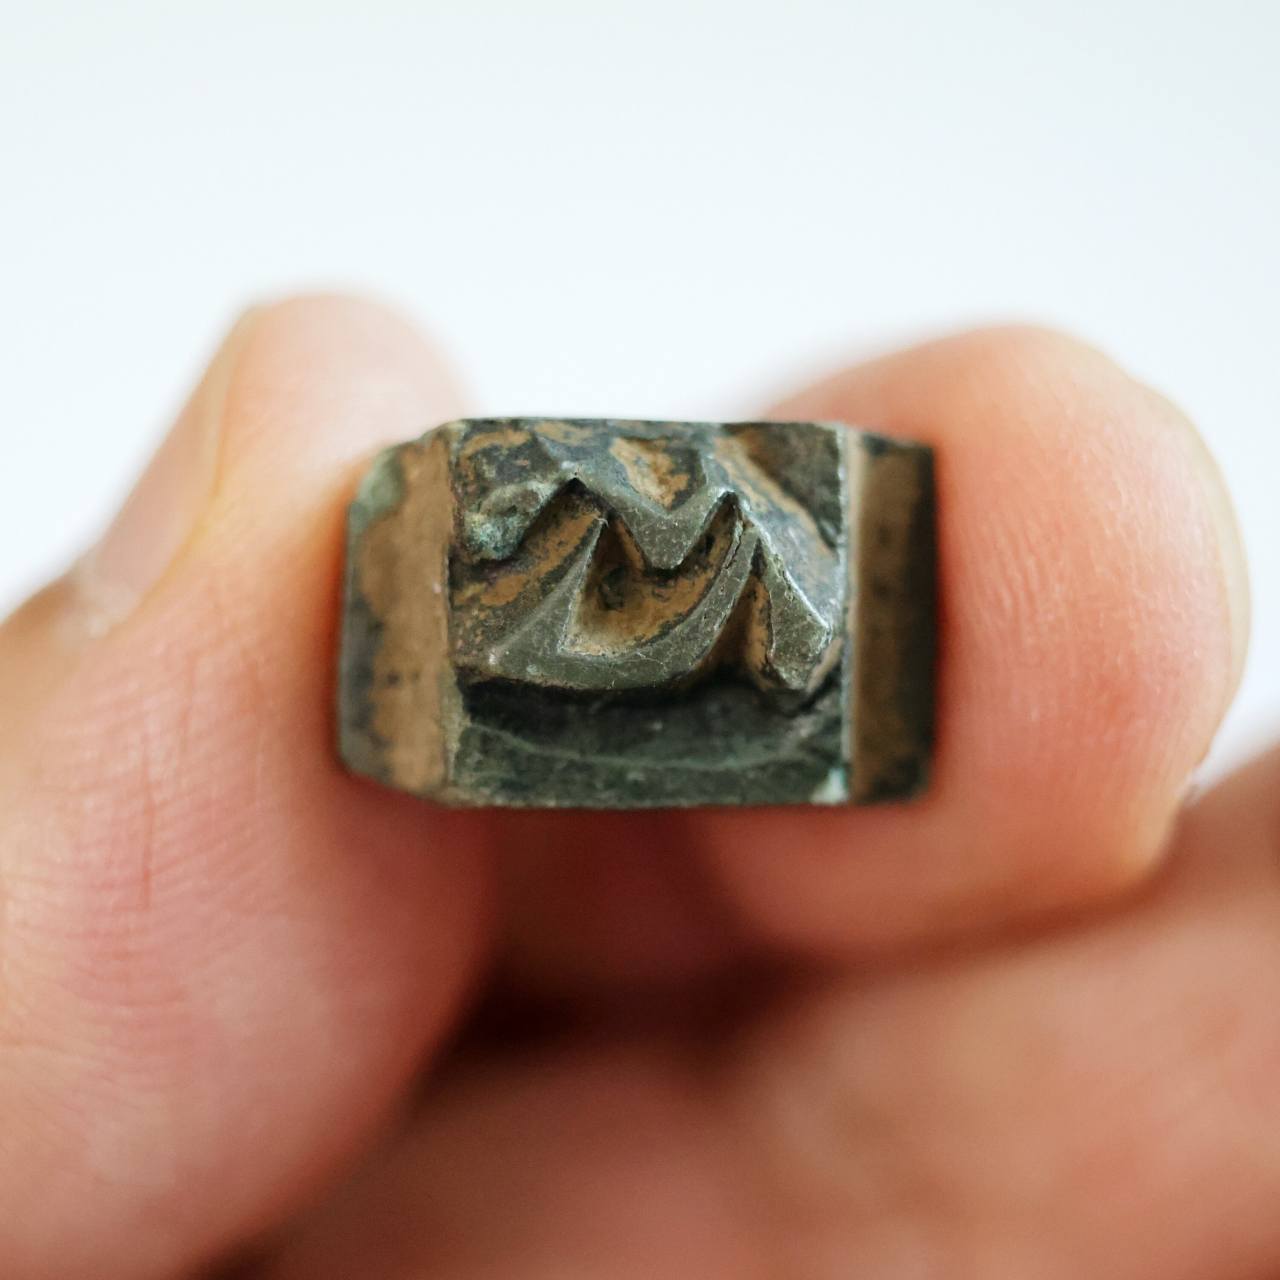 A Jeungdoga Goryeo movable metal printing type that was among those unveiled by a South Korean antiques dealer in 2010 shows the Hanja character “sim,” which is said to have been excavated from Manwoldae, the main palace of the Goryeo Kingdom, in Kaesong, present-day North Korea. (Hyungwon Kang)